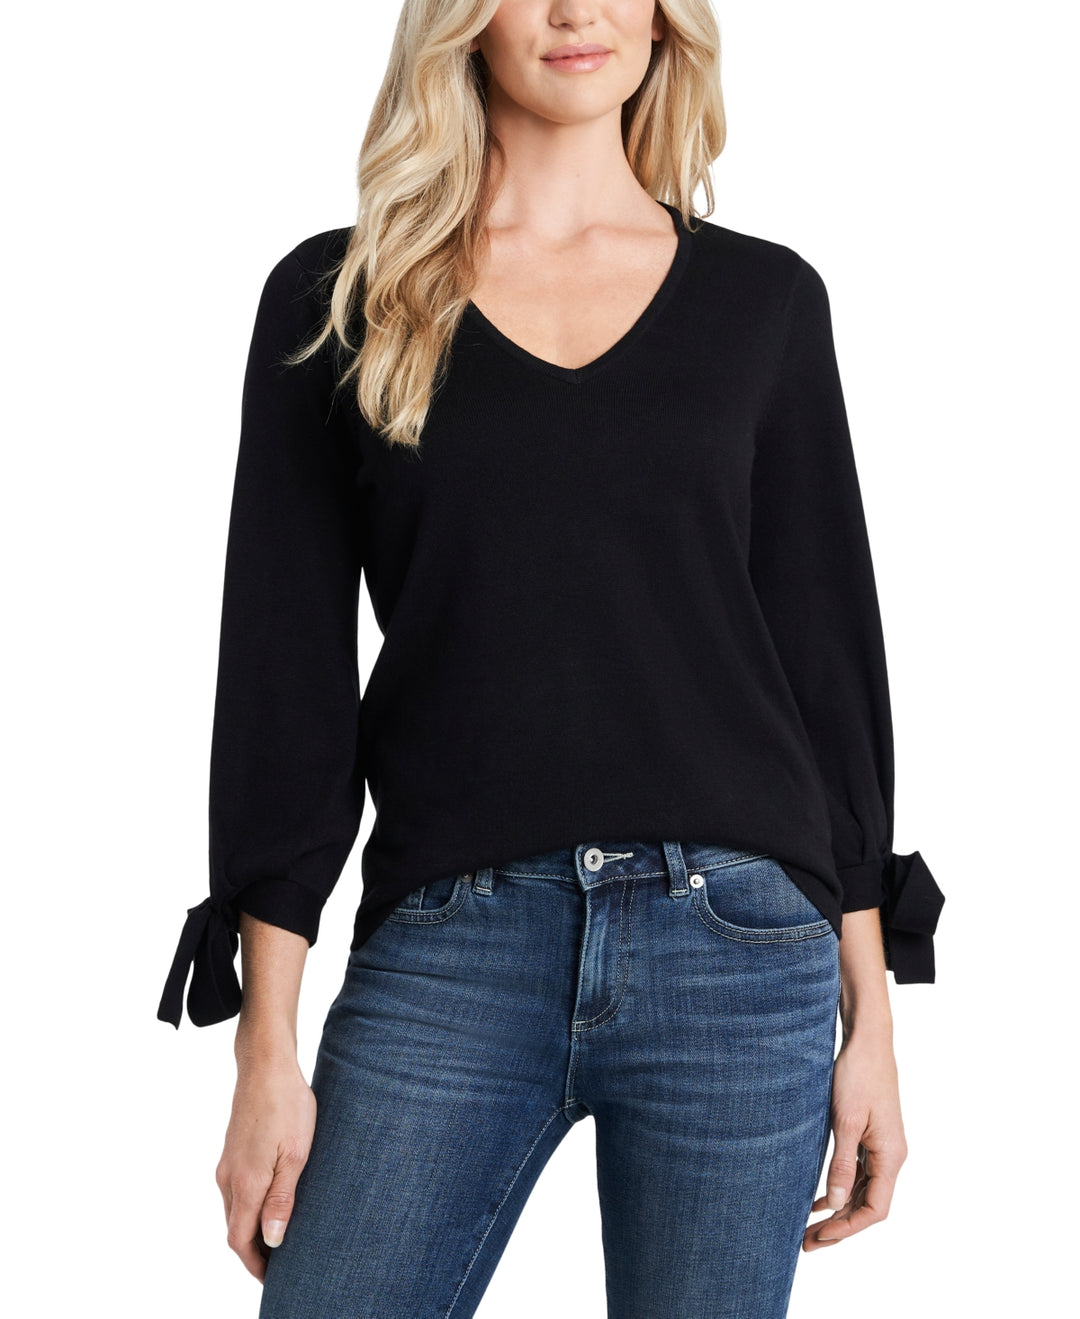 CeCe Women's Bow Tie Cuff Long Sleeve V Neck Sweater Black Size Small